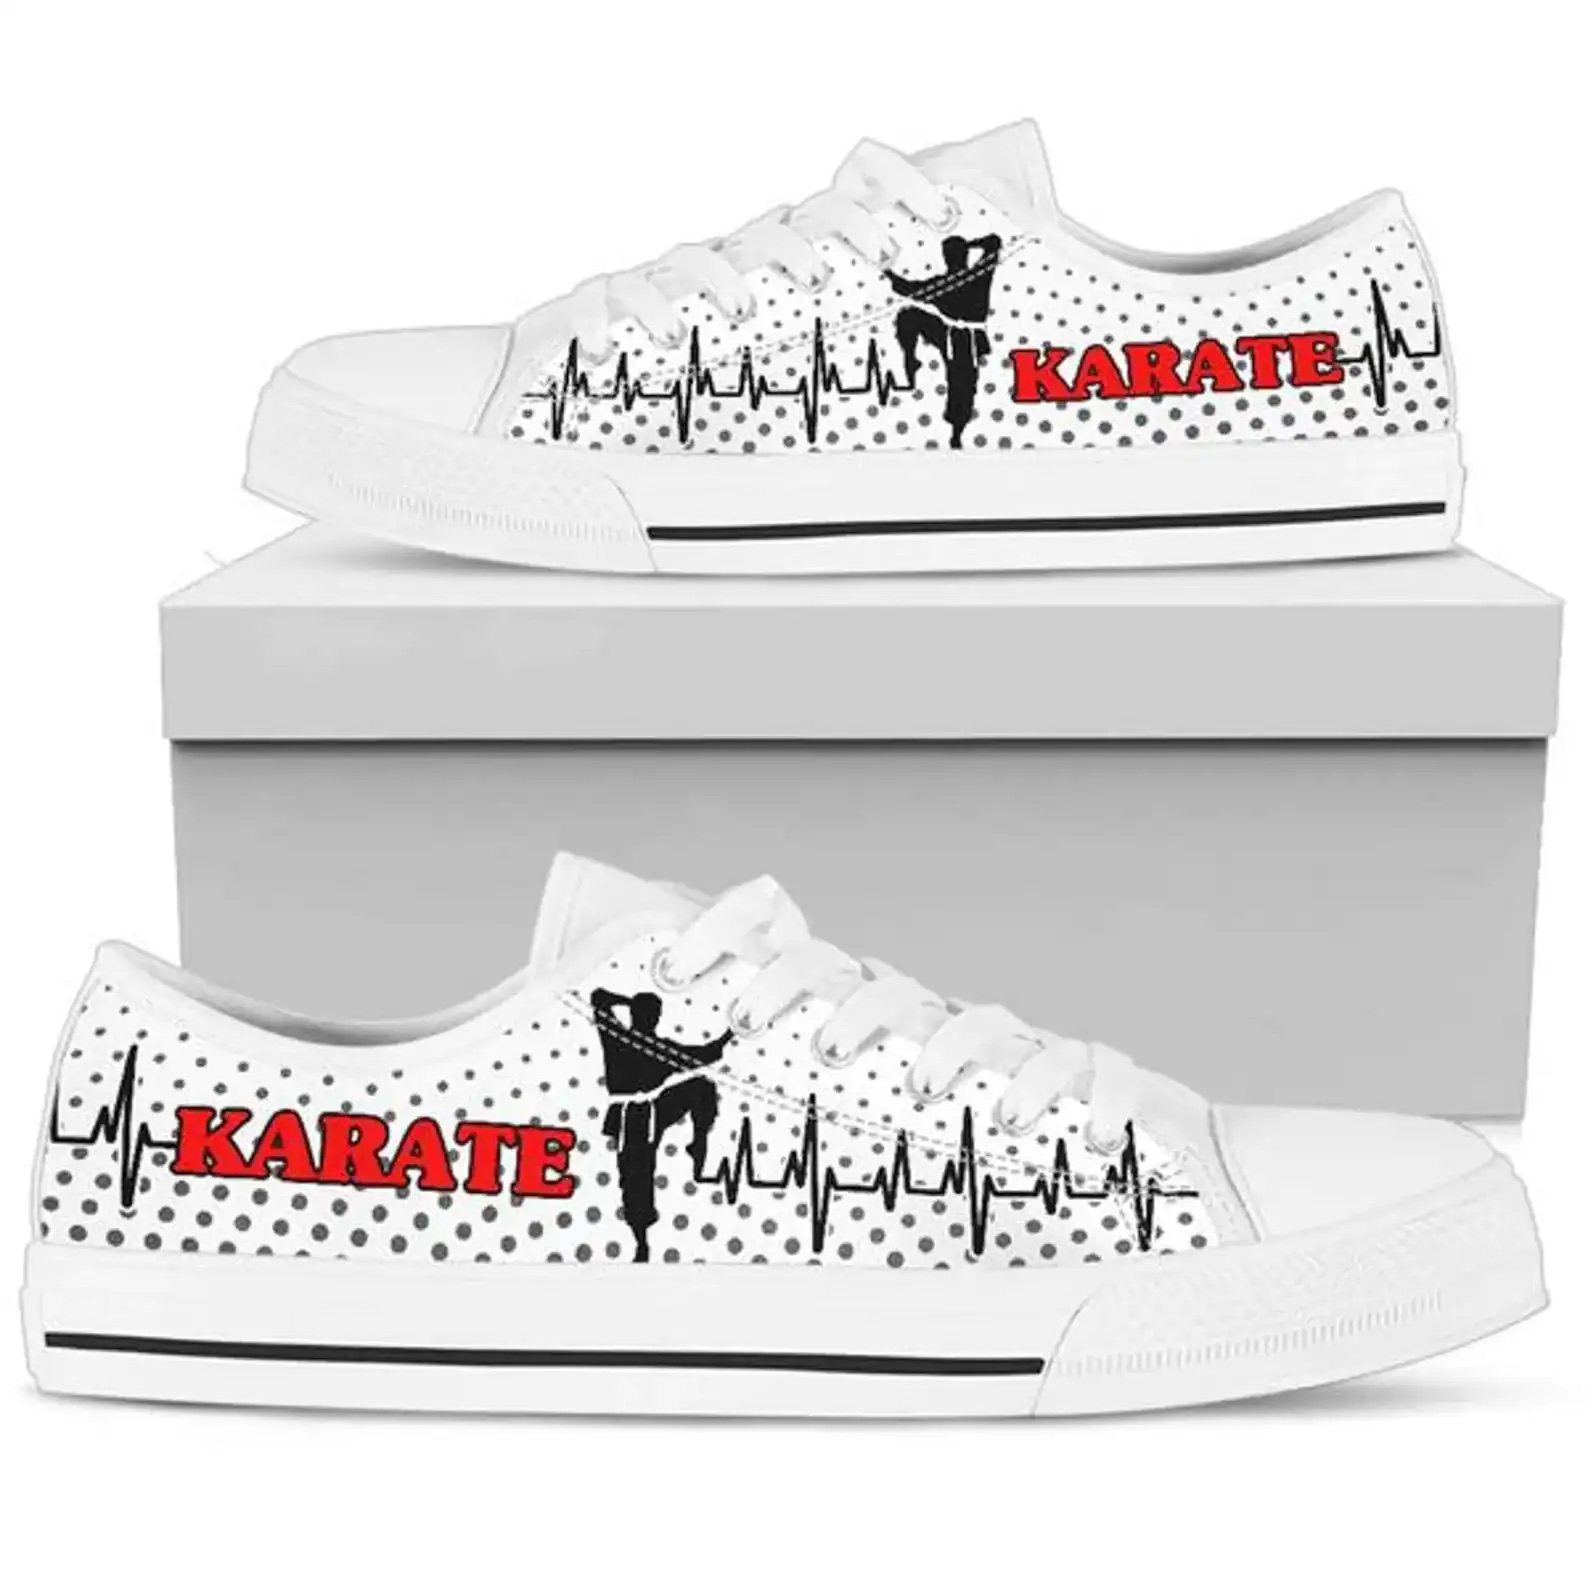 Customized Shoes Karate Ecg Polka Dots Low Top Sneakers